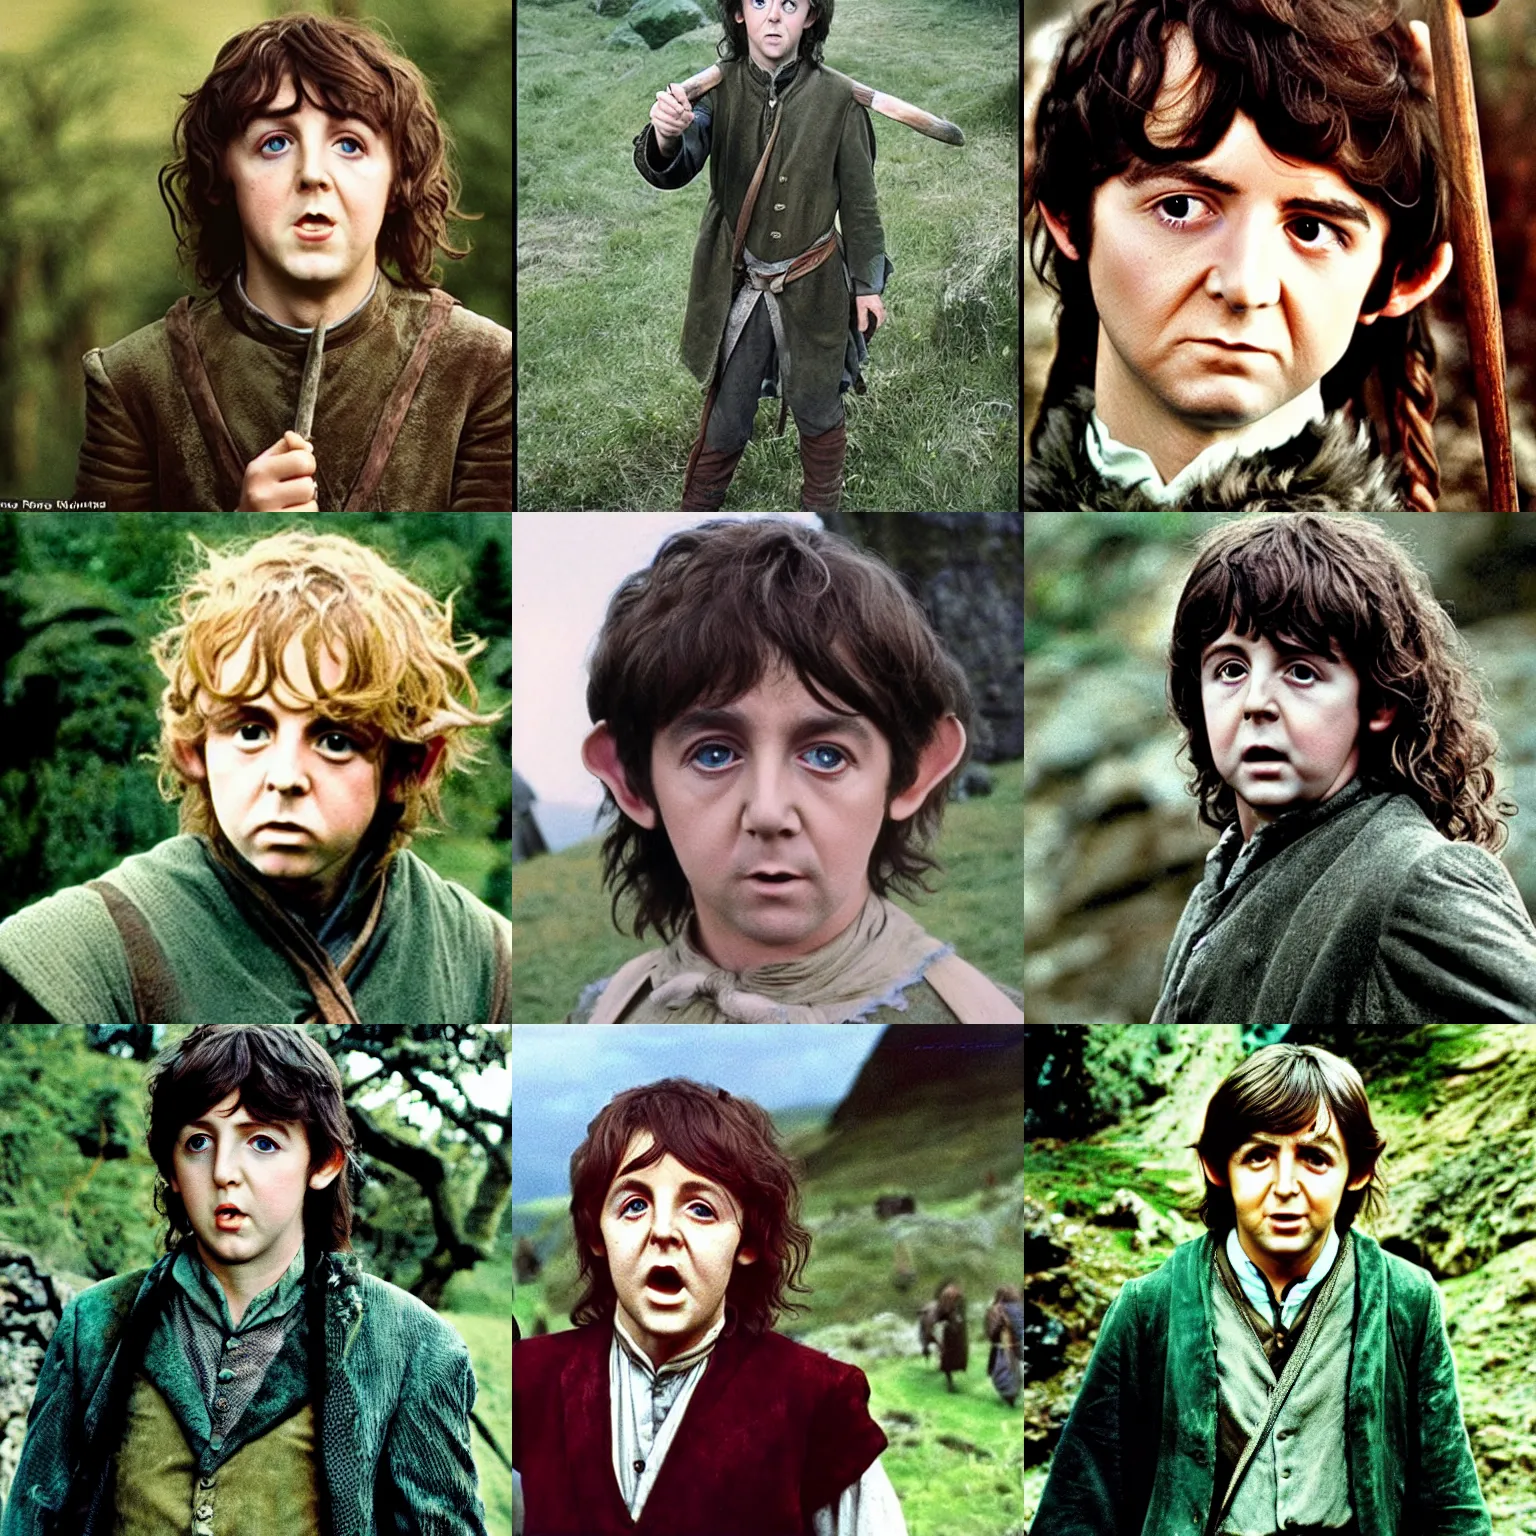 Prompt: A full color still of young Paul McCartney in Hobbit makeup and costume, in The Lord of the Rings directed by Stanley Kubrick,